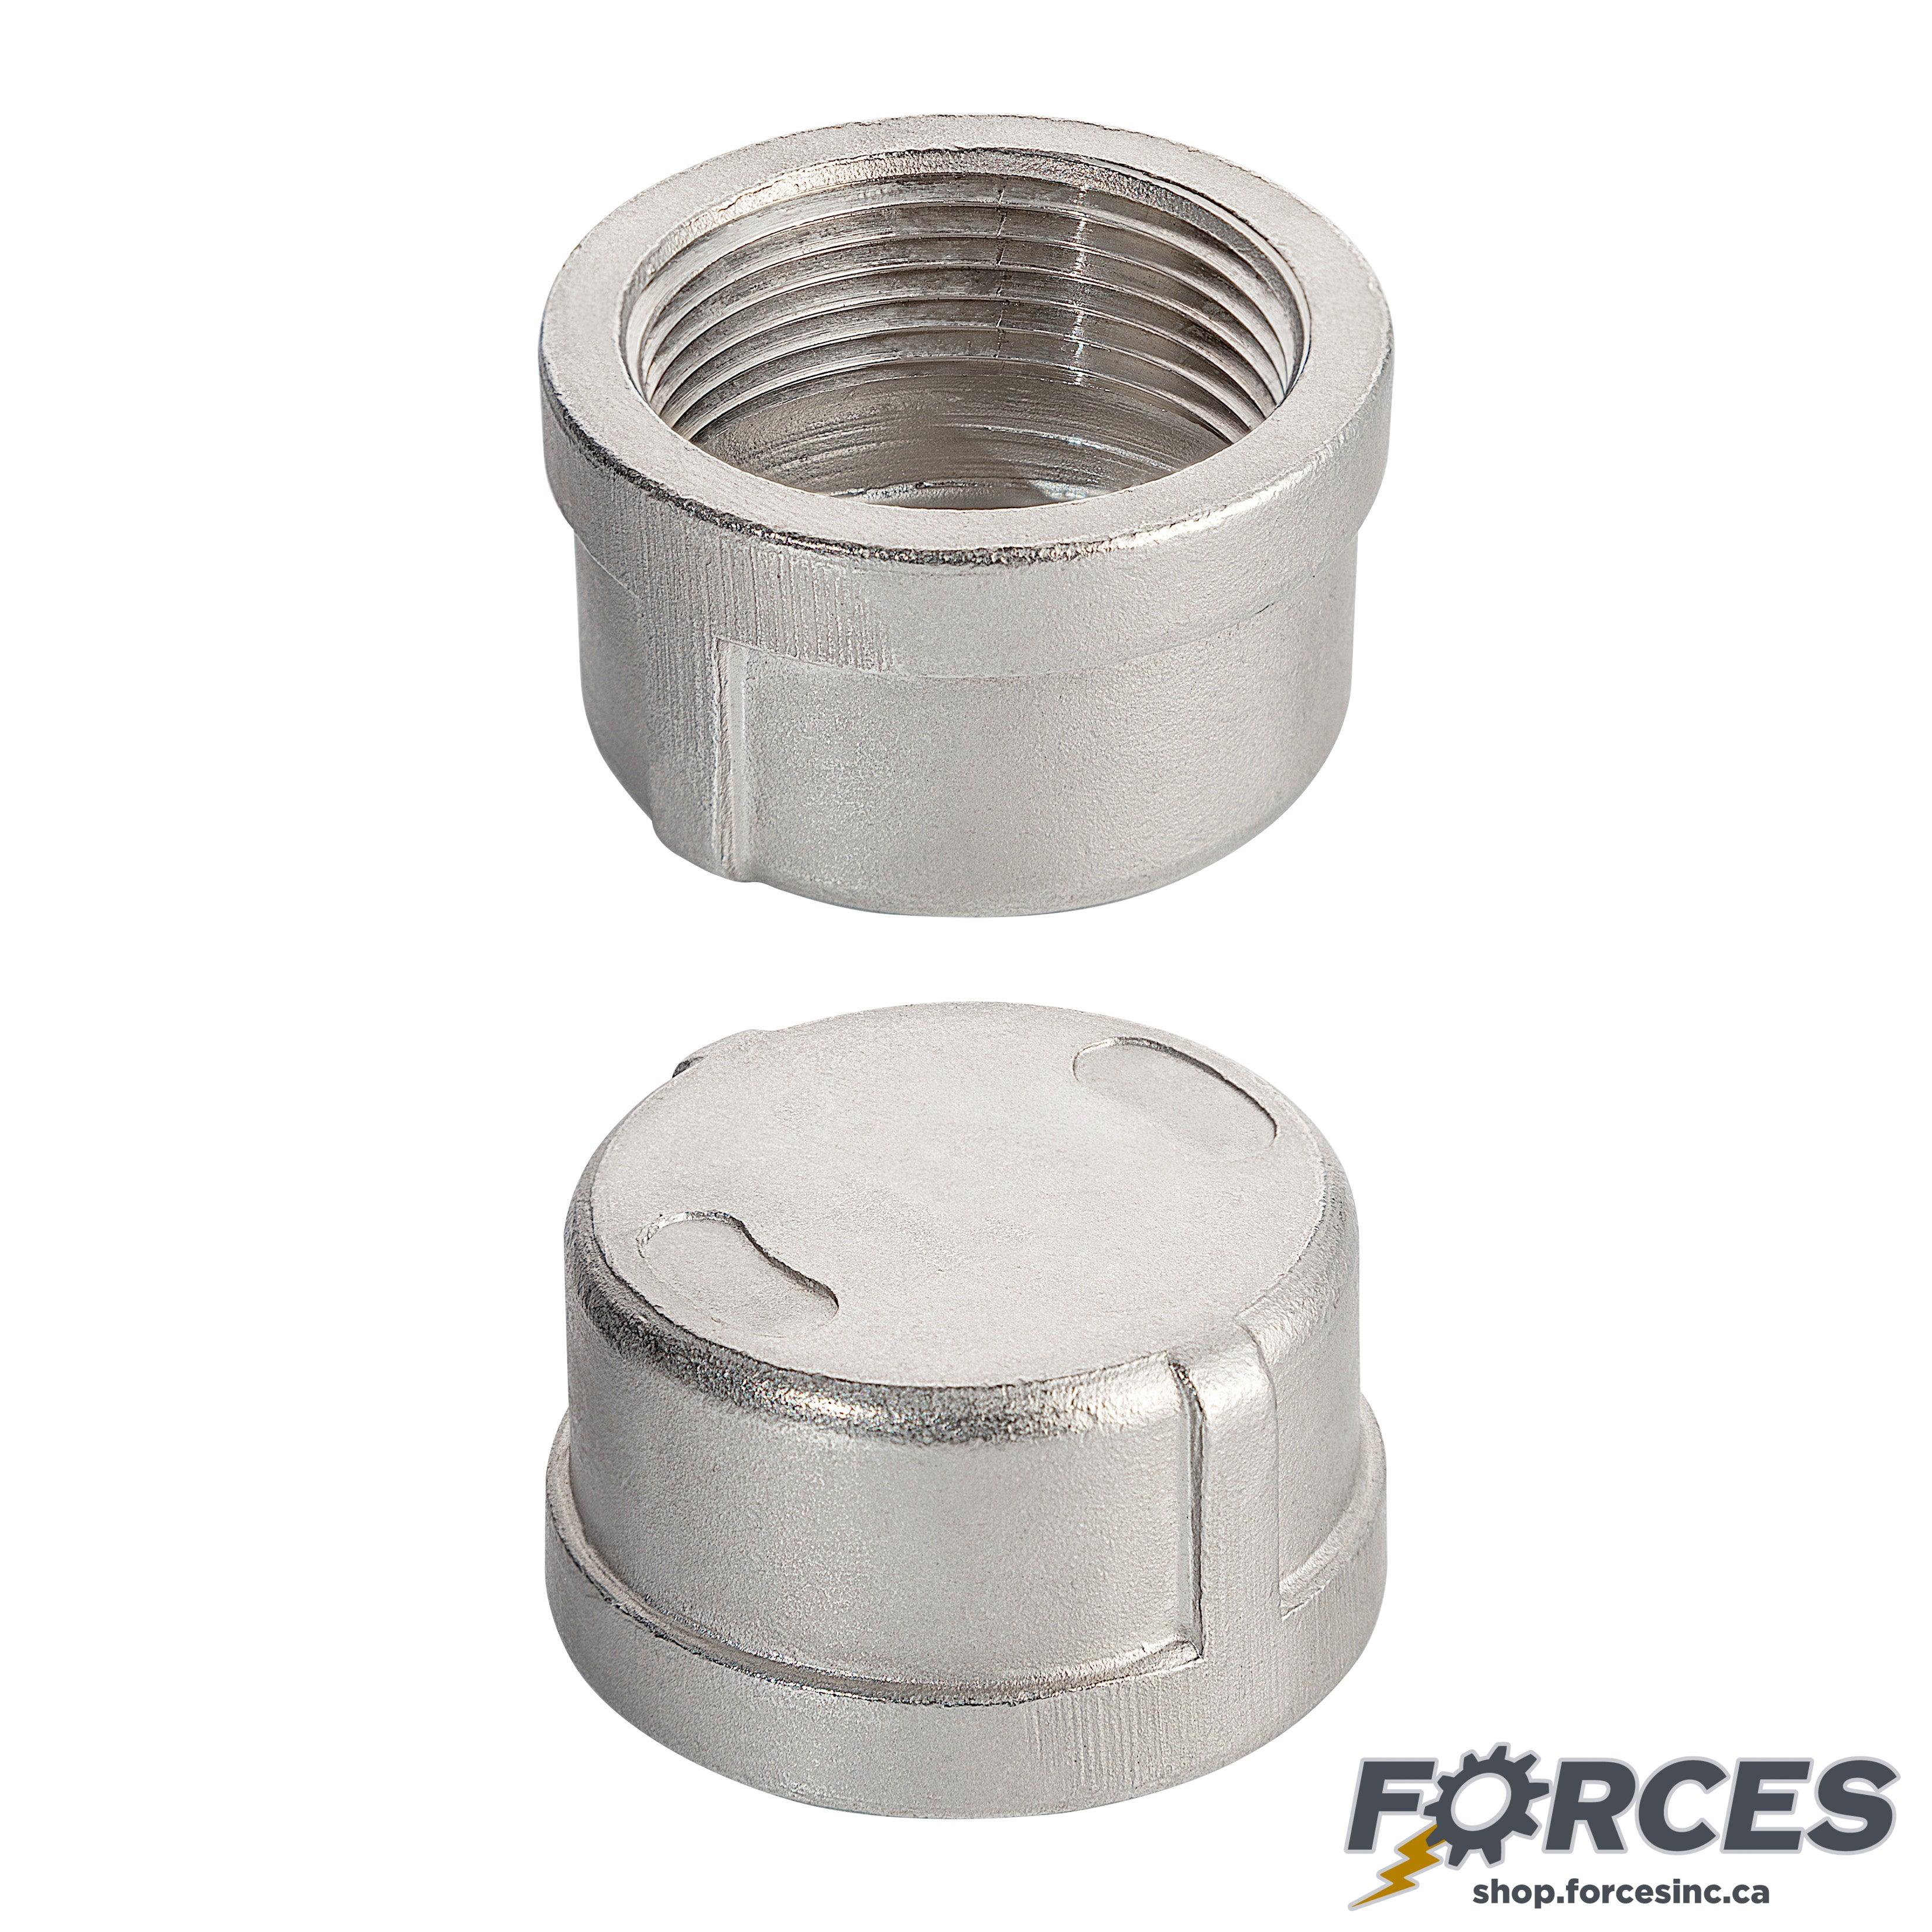 1/4" Cap NPT #150 - Stainless Steel 304 - Forces Inc